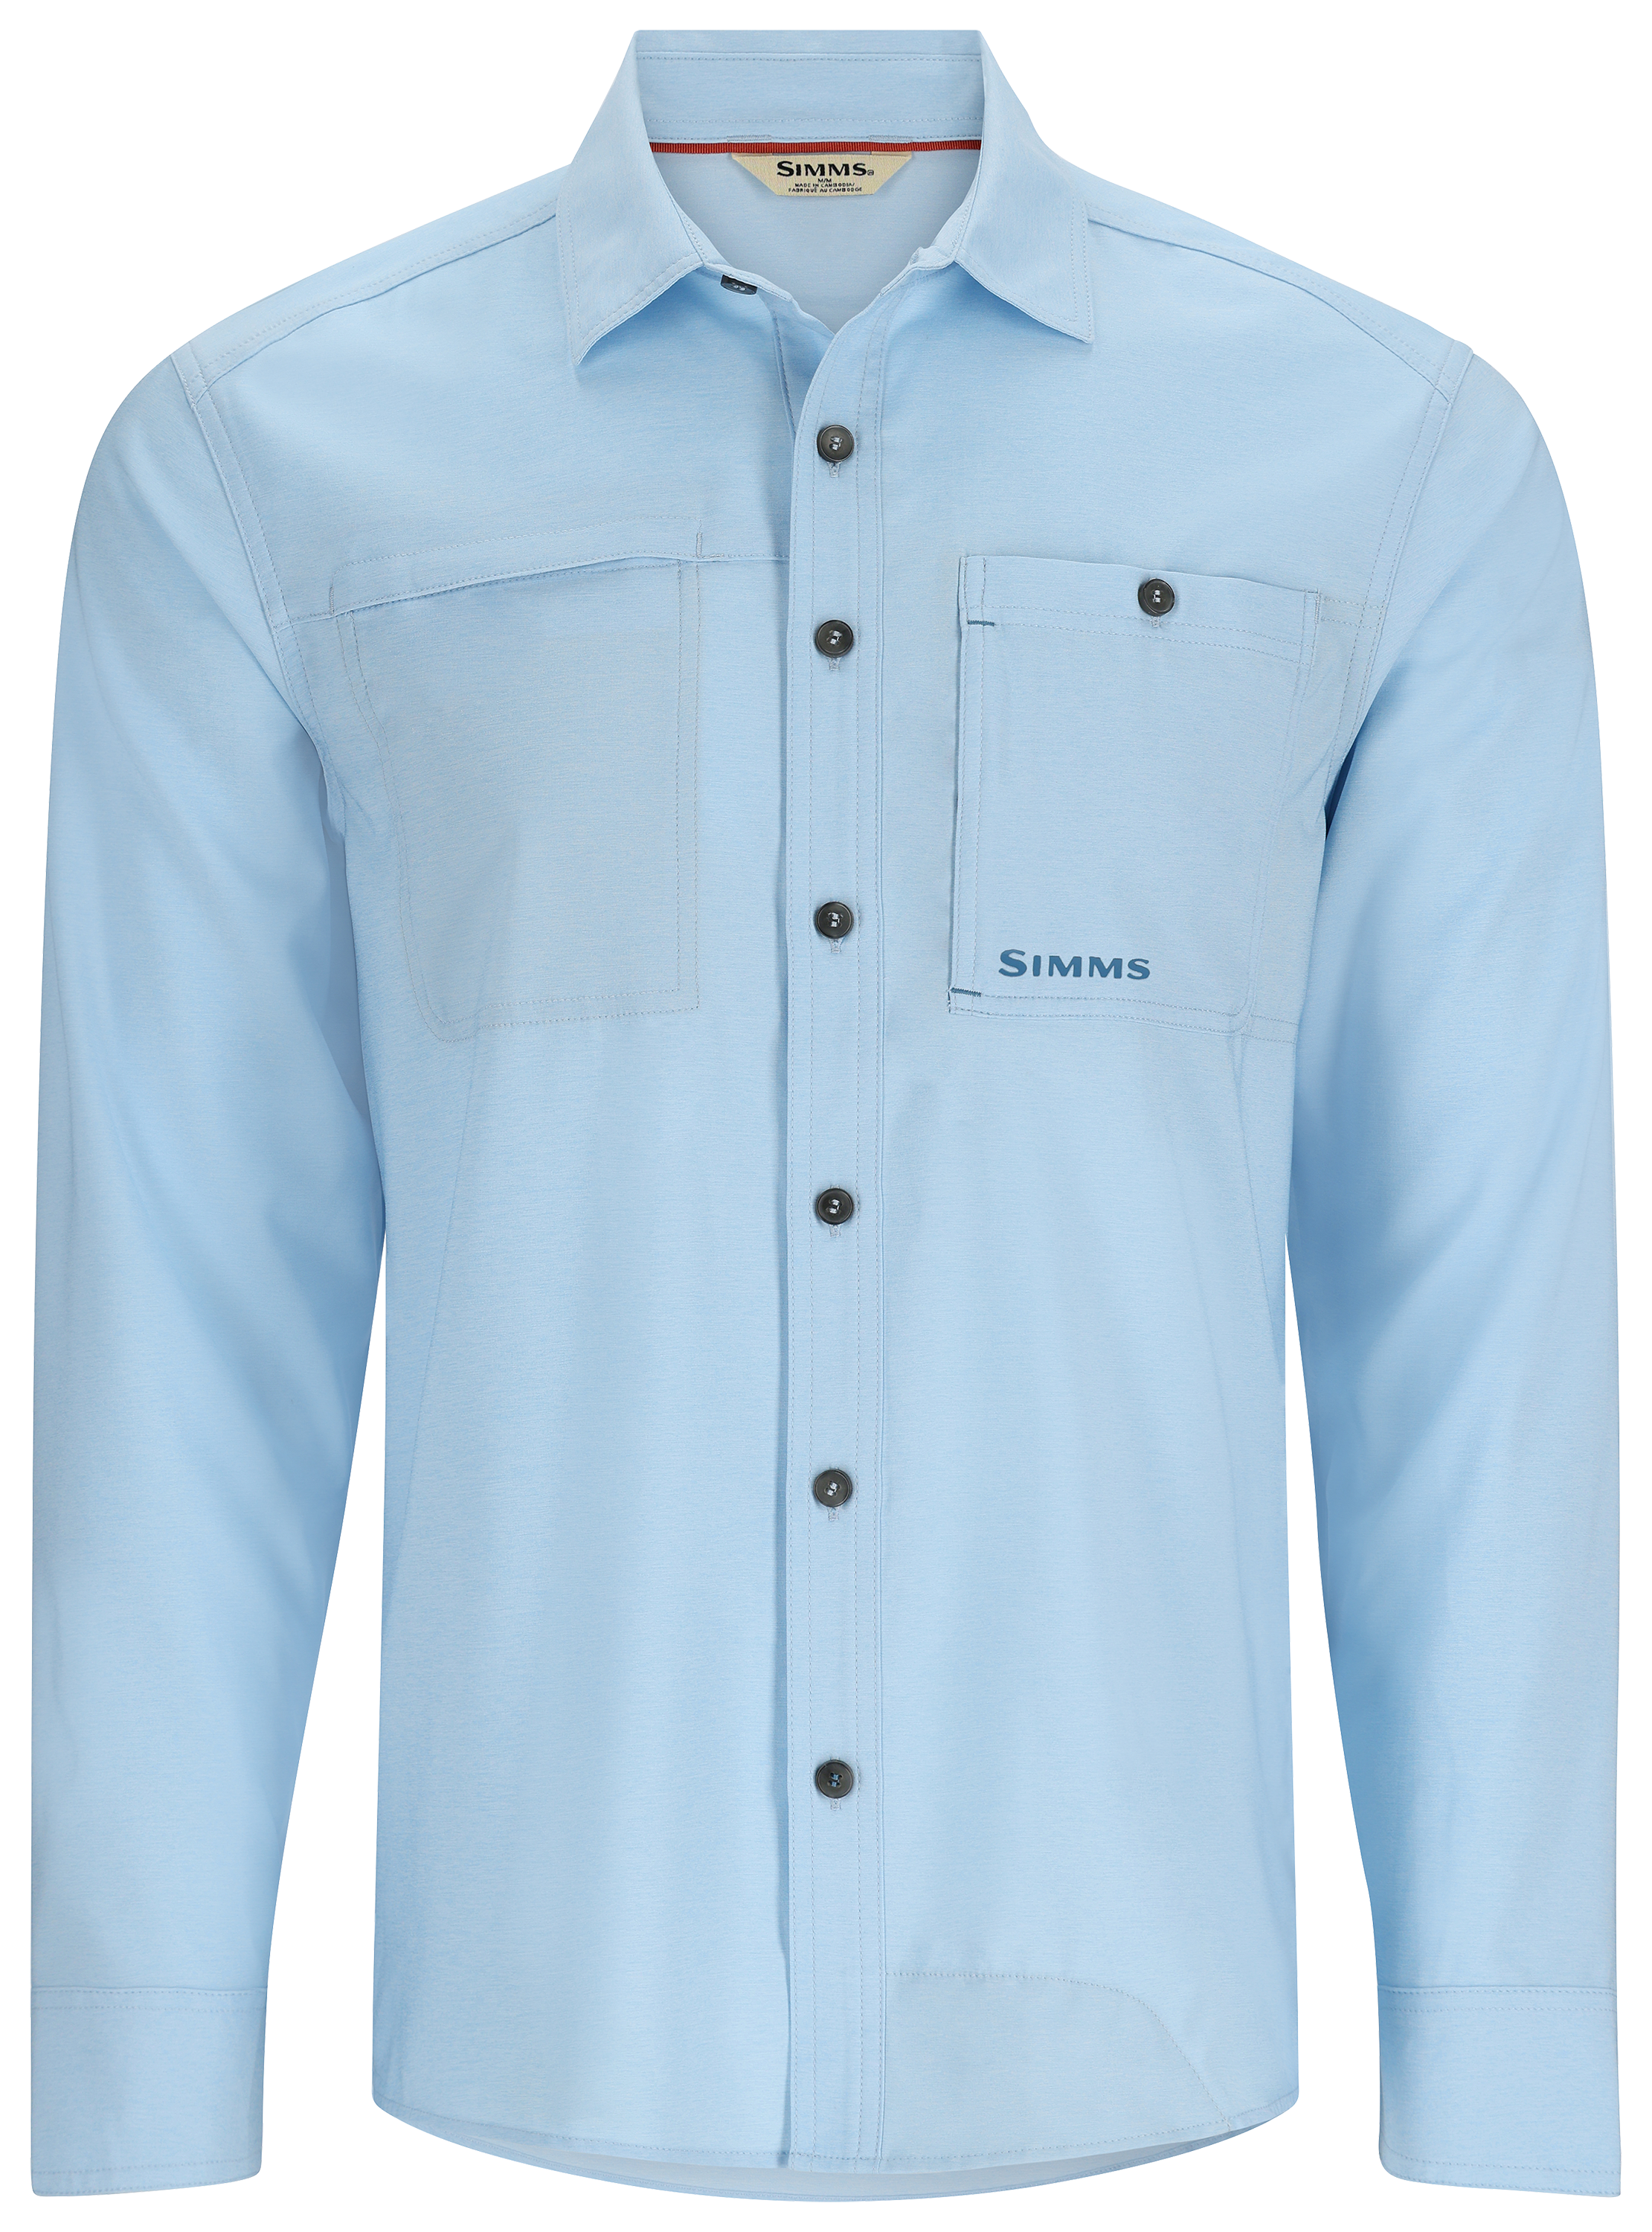 Simms Long Sleeve Button-Up Casual Button-Down Shirts for Men for